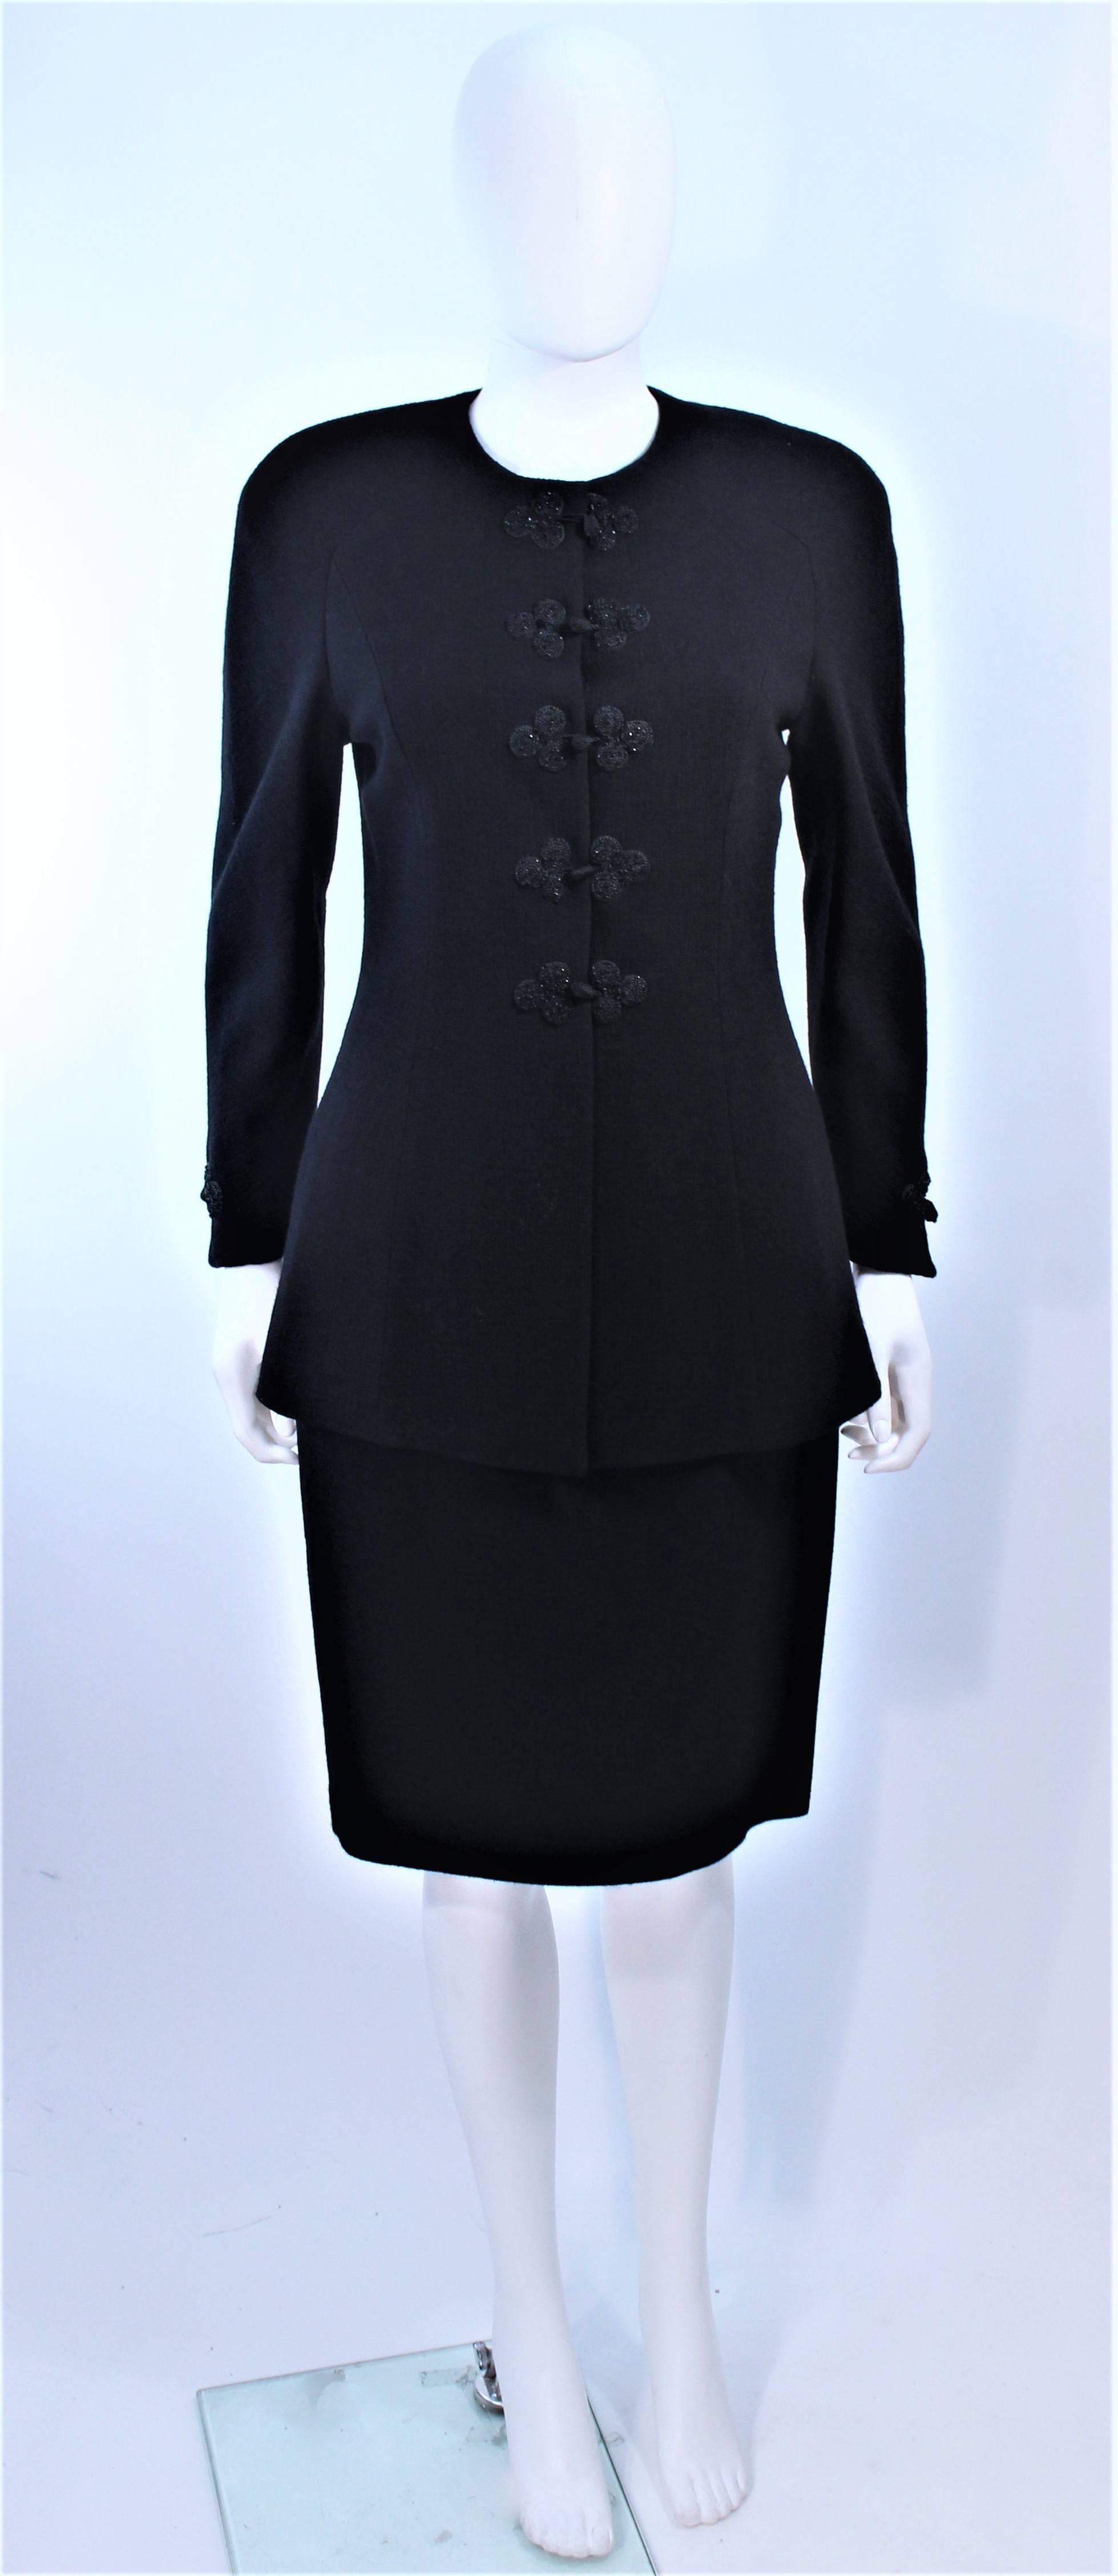 This Valentino skirt suit is composed of a black wool and features beaded button details. There is a classic style pencil skirt with zipper closure. In excellent pre-owned condition.

**Please cross-reference measurements for personal accuracy.